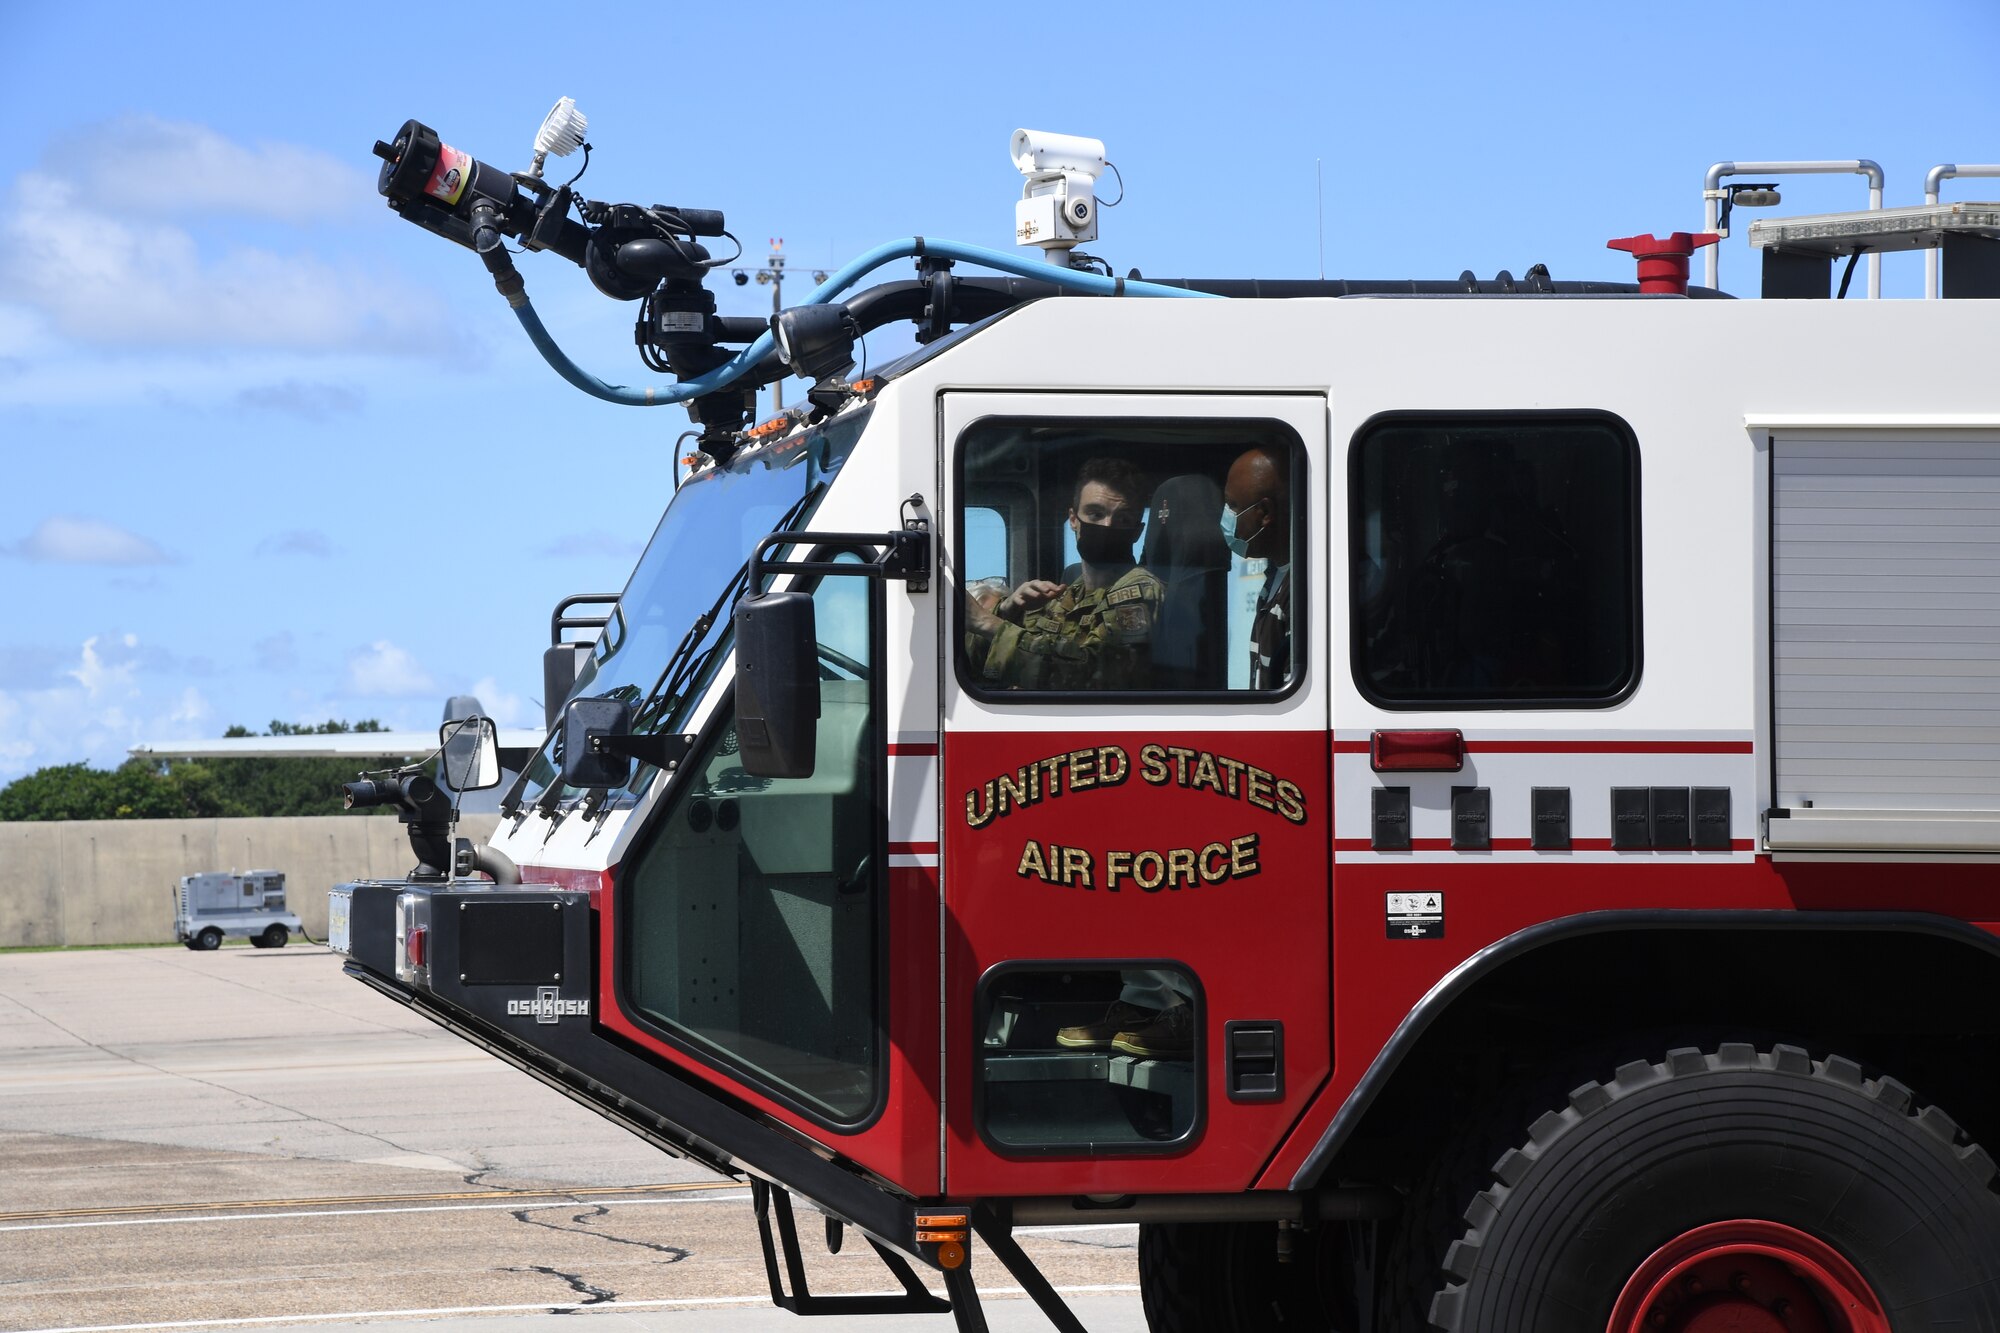 U.S. Air Force Senior Airman Tanis Jeffers, 81st Civil Engineer Squadron firefighter, provides a fire truck water spray demonstration during the Mississippi Educators Tour for Law and Public Safety and Fire Science tour at Keesler Air Force Base, Mississippi, July 27, 2022. More than 30 educators also received 81st SFS military working dog and virtual reality training demonstrations. (U.S. Air Force photo by Kemberly Groue)